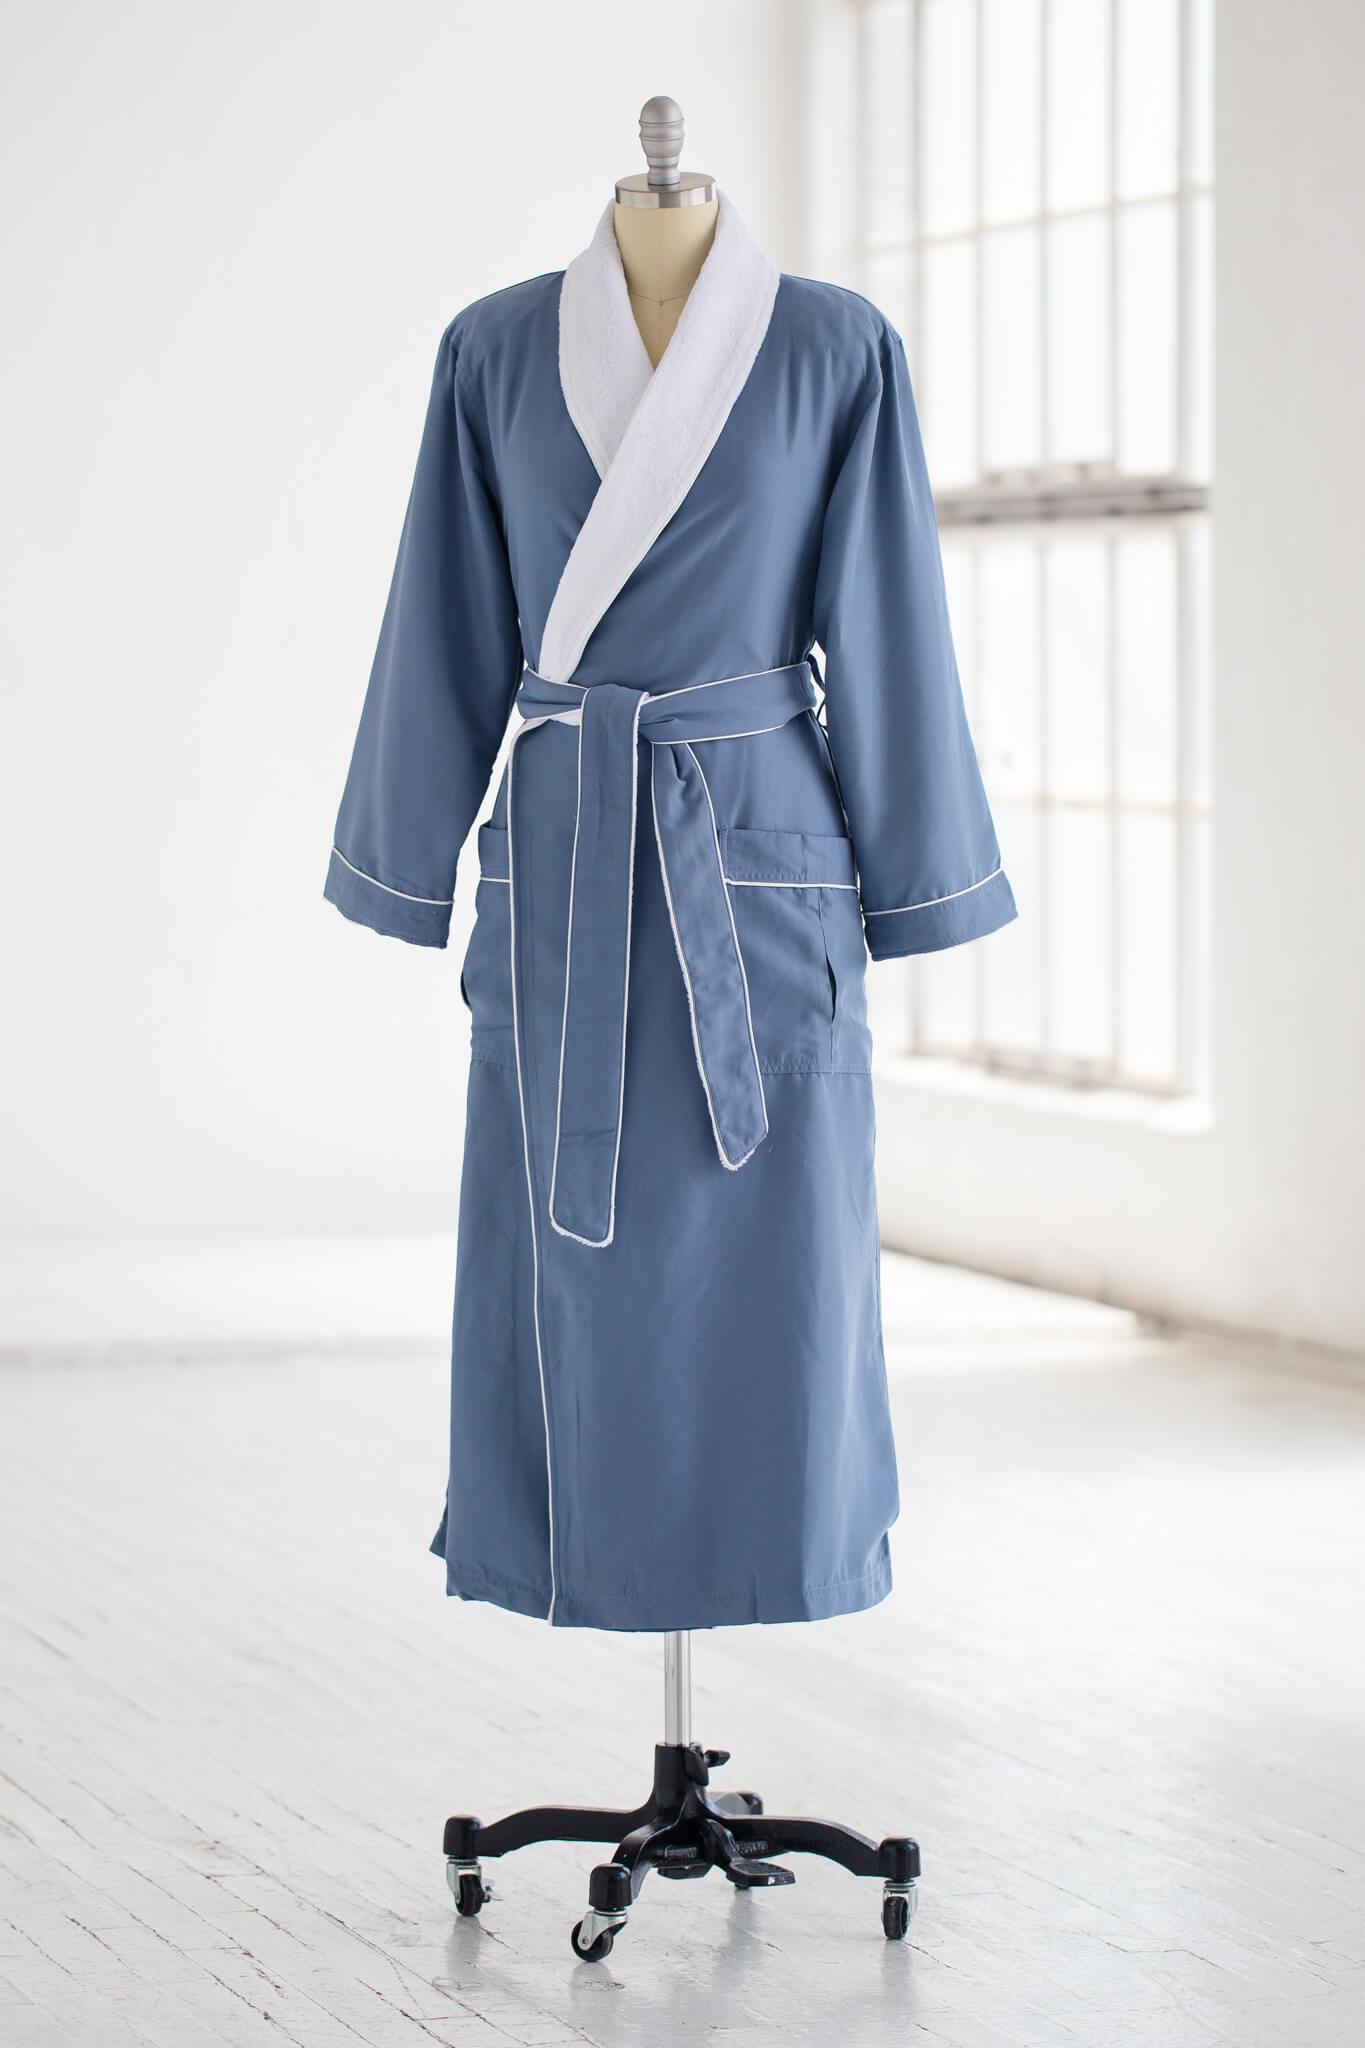 Four Seasons Robe Combed Cotton Long Length David Archy Combed Cotton Soft  Gentlemen Robe